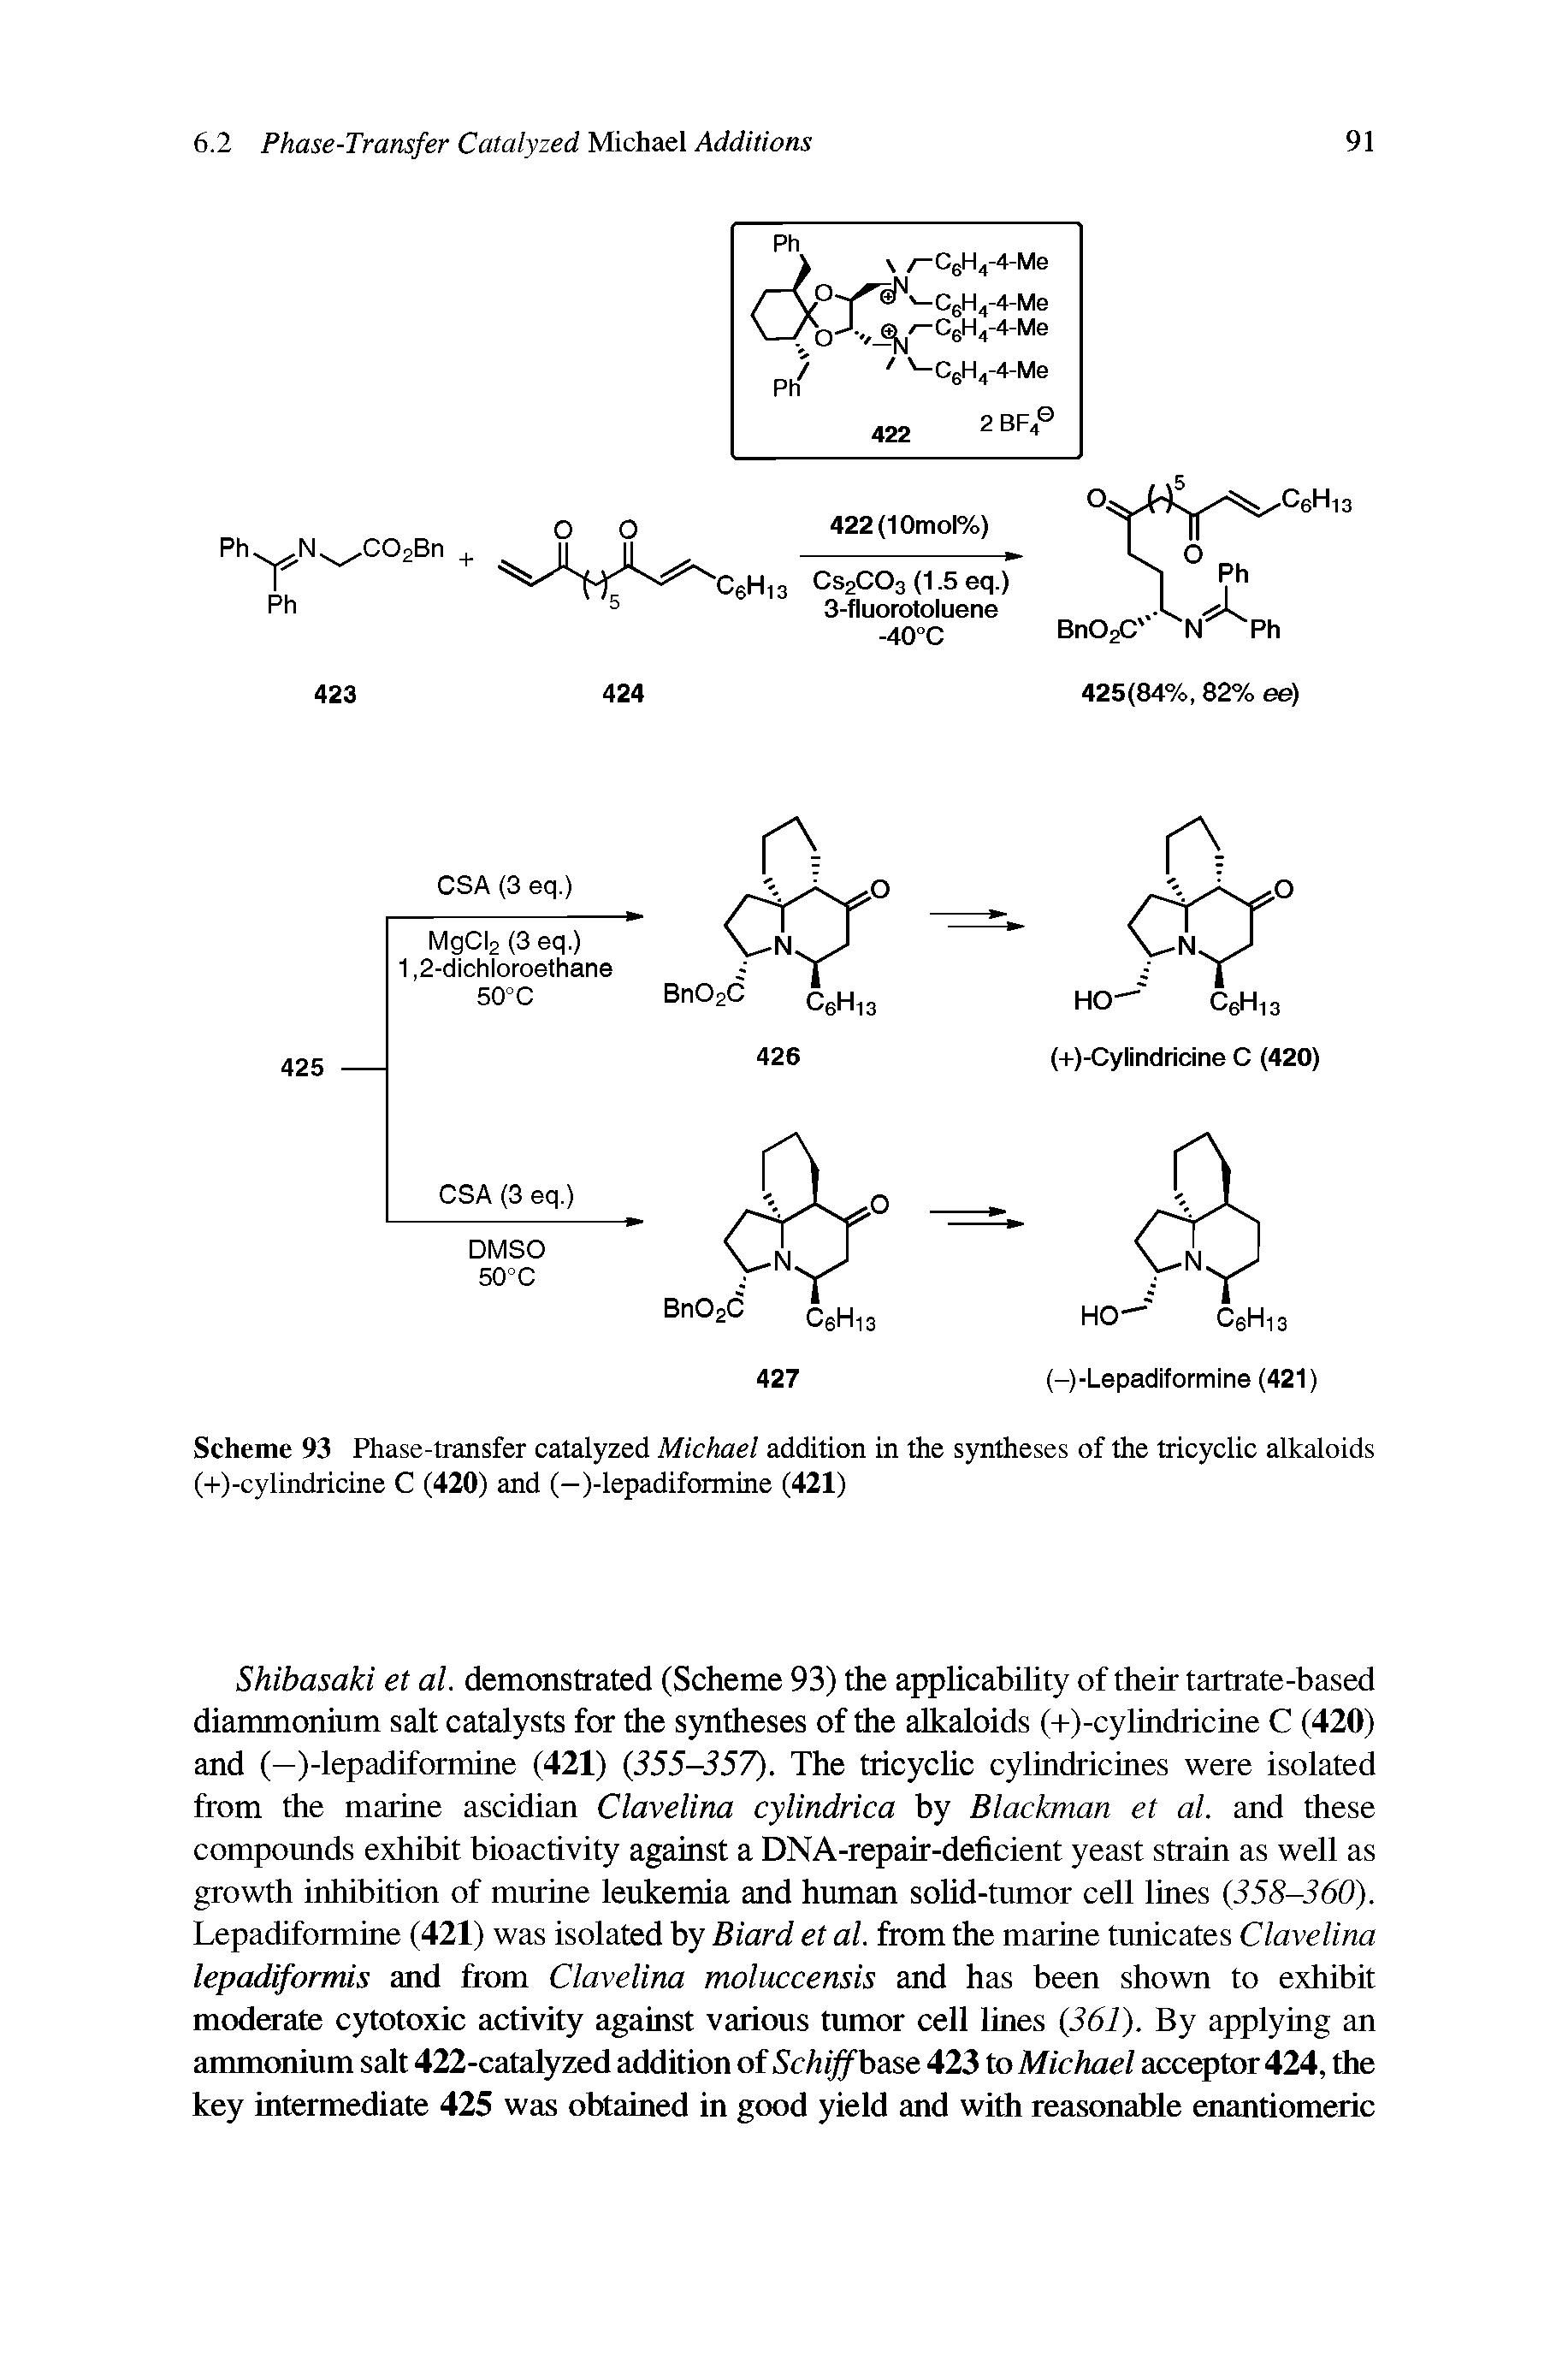 Scheme 93 Phase-transfer catalyzed Michael addition in the syntheses of the tricyclic alkaloids (-i-)-cylindricine C (420) and (—)-lepadiformine (421)...